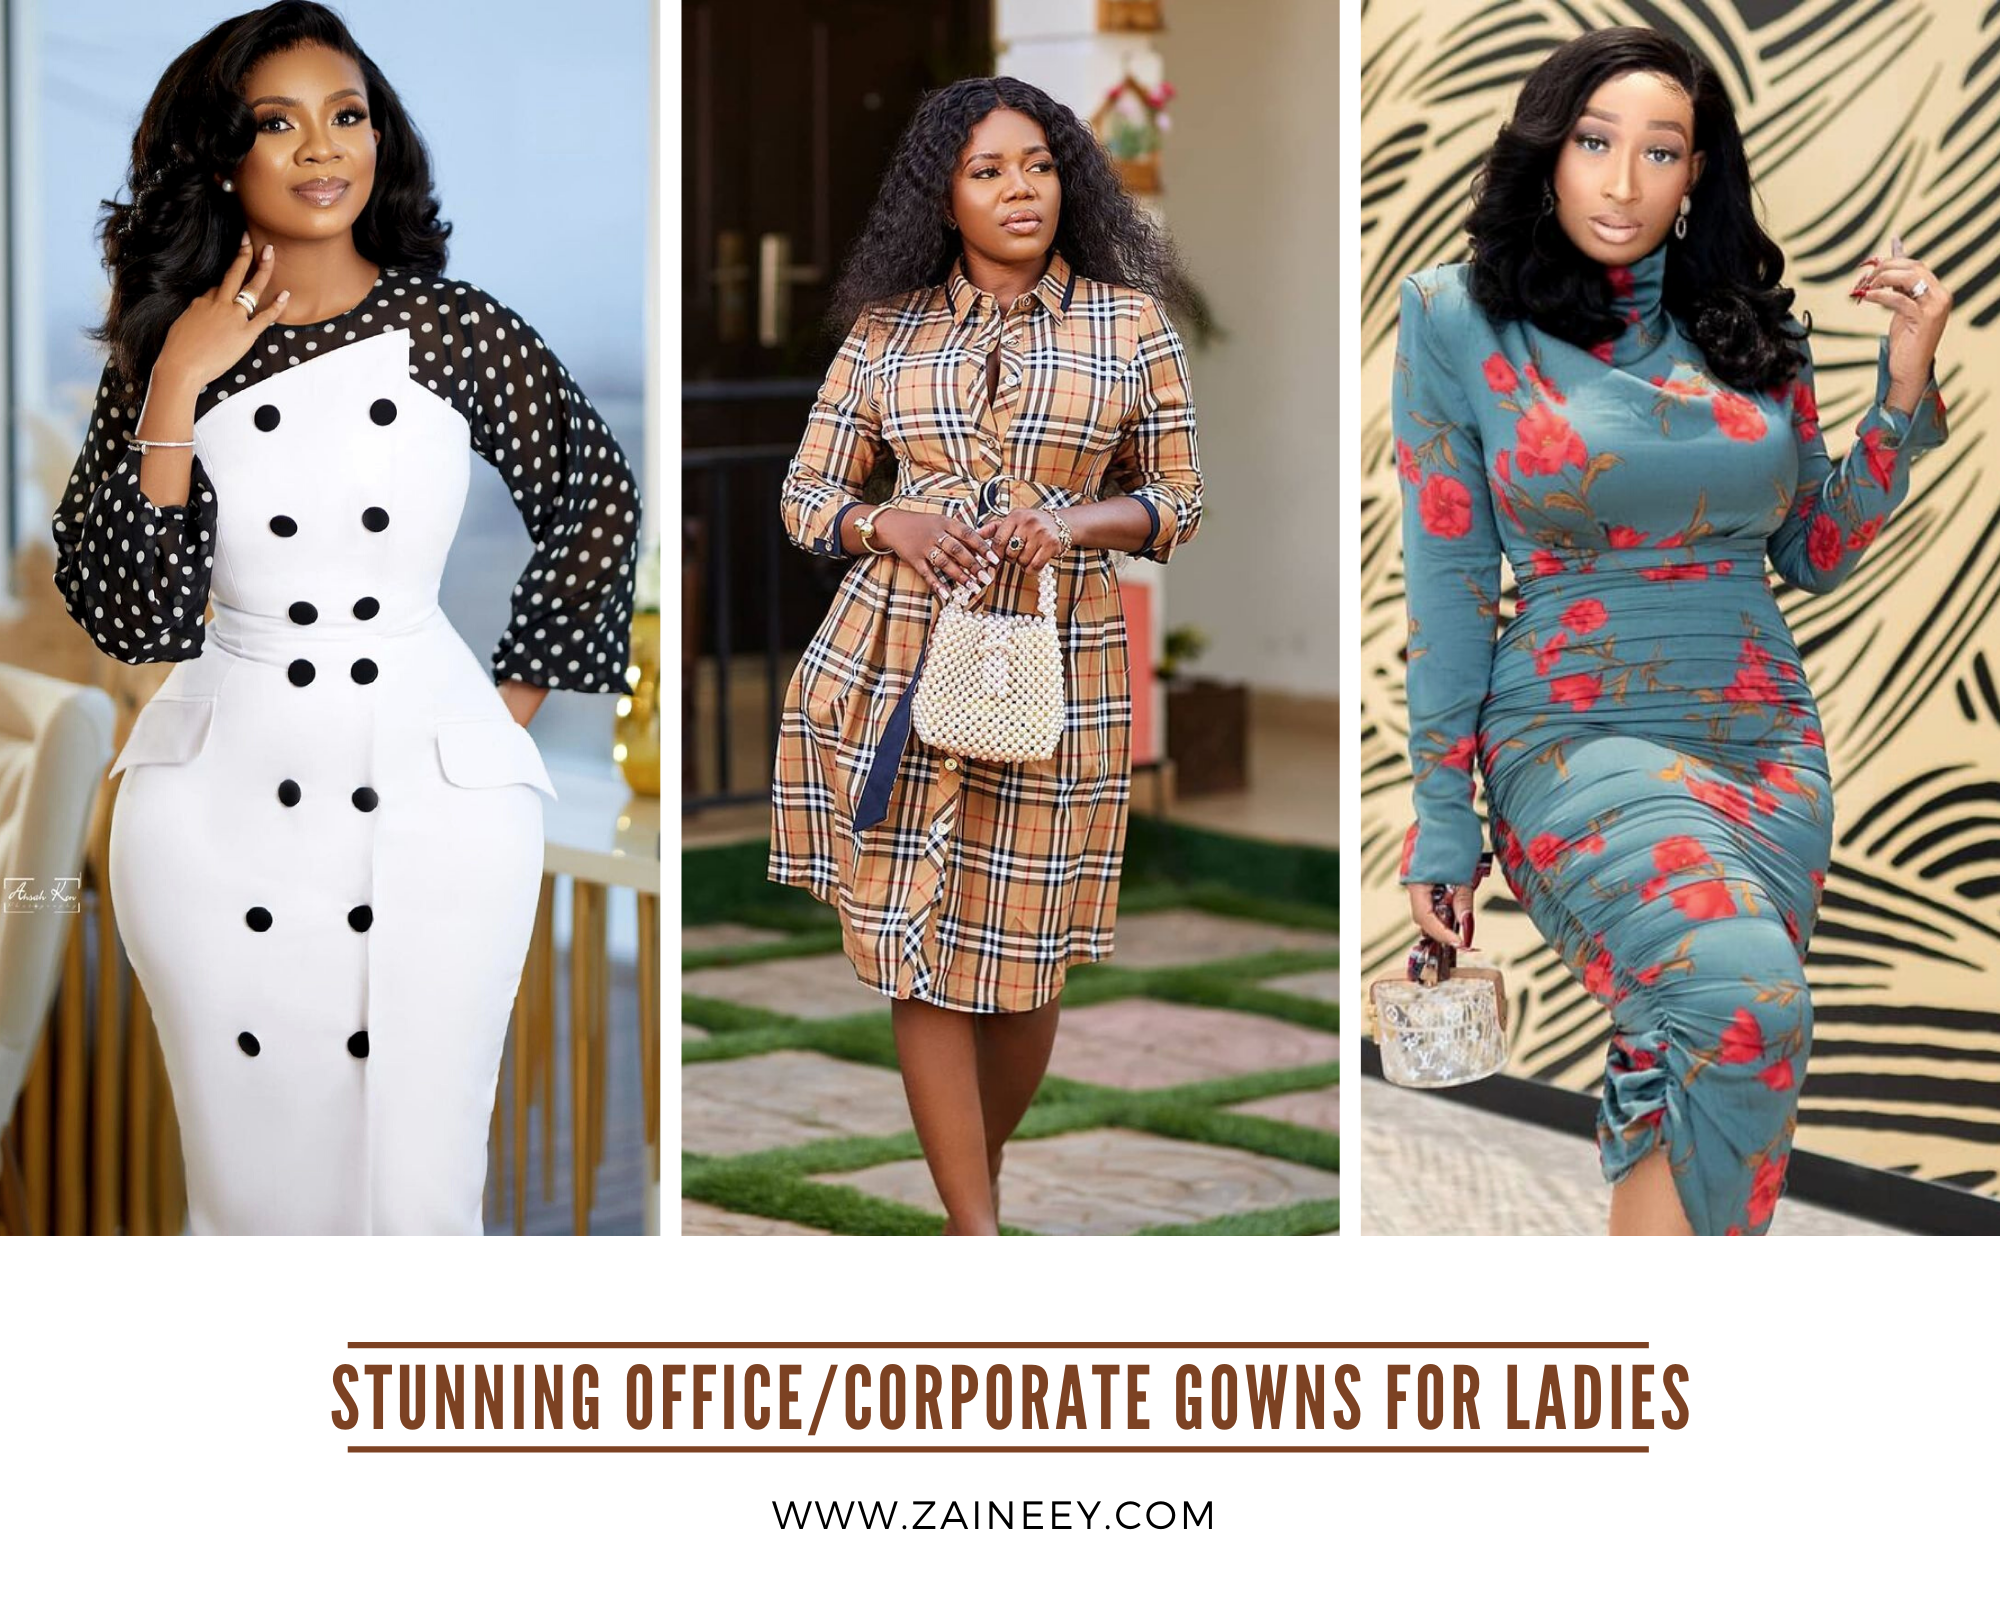 Office Dresses For Women: Smashing and Stylish Corporate Gowns Styles for  Ladies | Zaineey's Blog